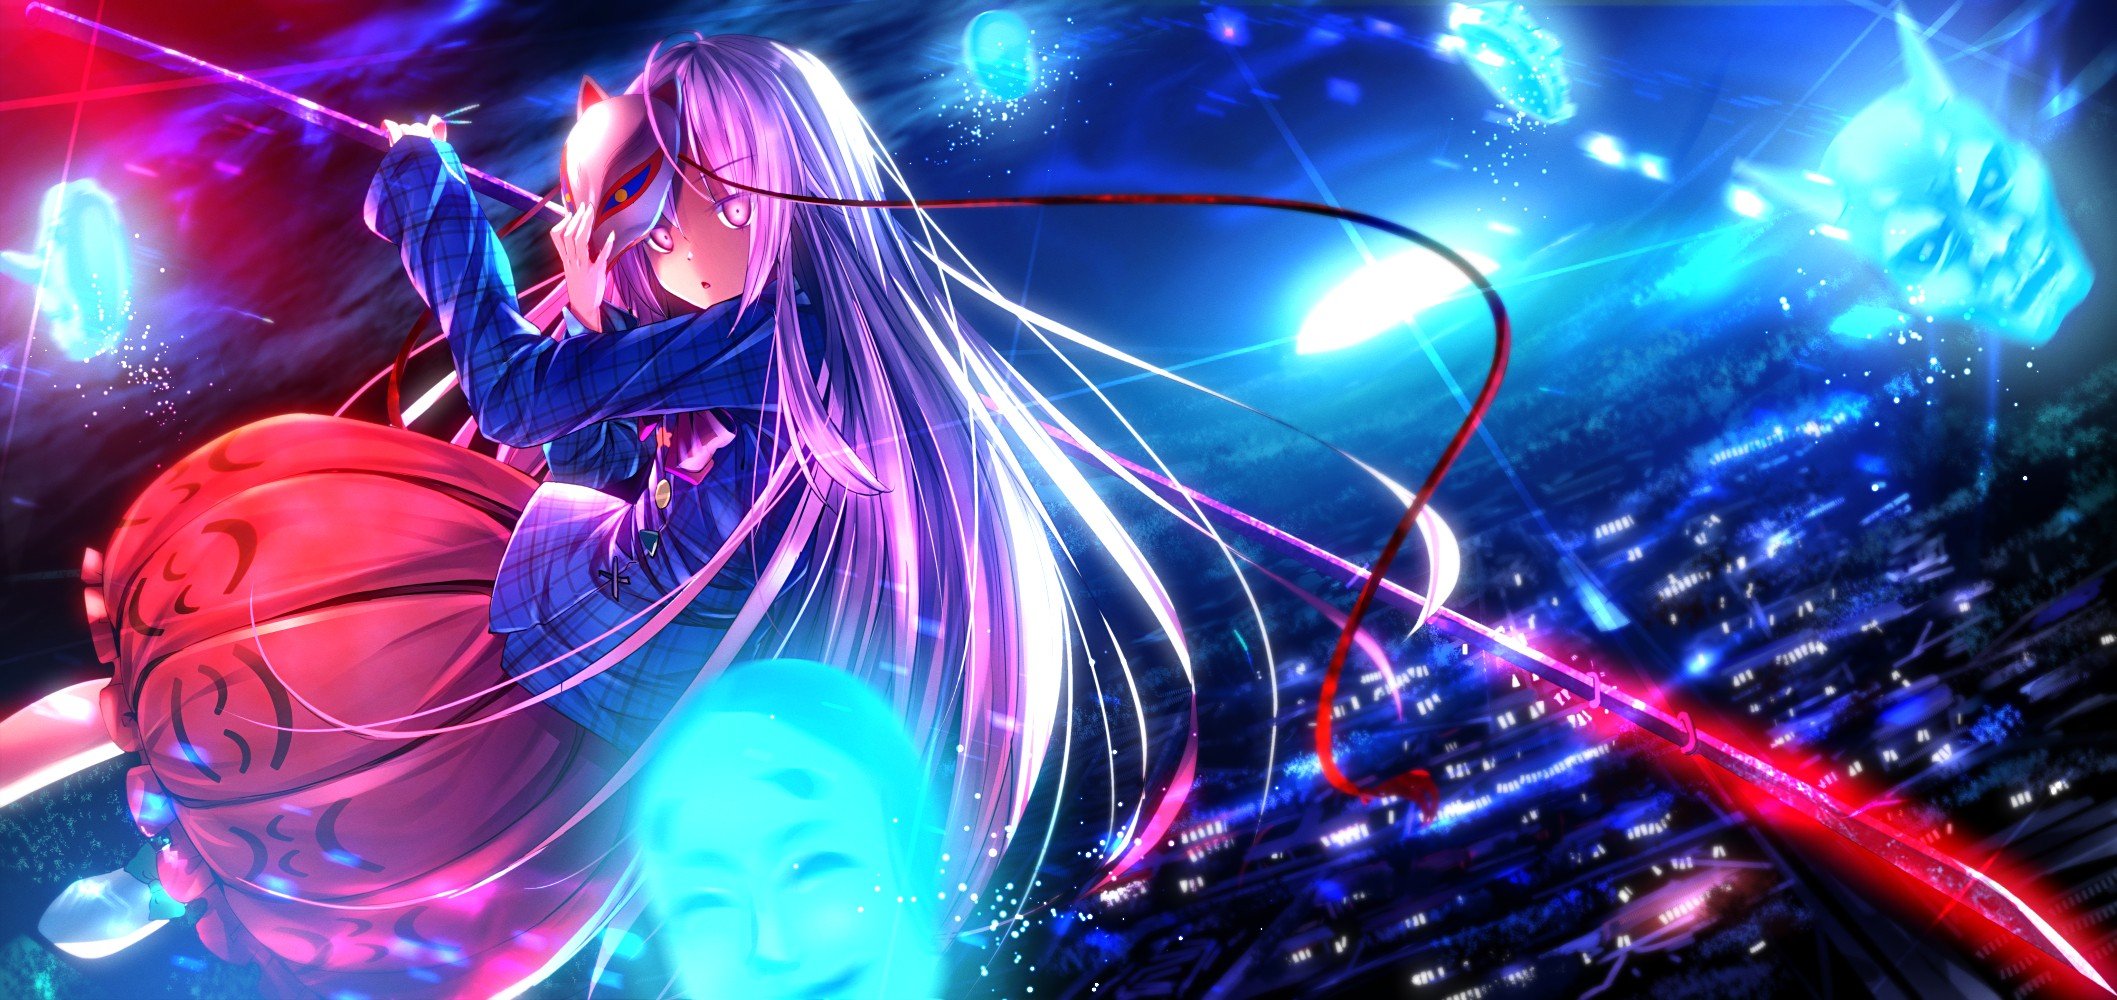 video, Games, Clouds, Touhou, Night, Flying, Moon, Skirts, Long, Hair, Ribbons, Weapons, Oni, Purple, Hair, Pink, Hair, Glowing, Masks, Scenic, Shirts, Open, Mouth, Pink, Eyes, Anime, Girls, Glowing, Eyes, Polea Wallpaper